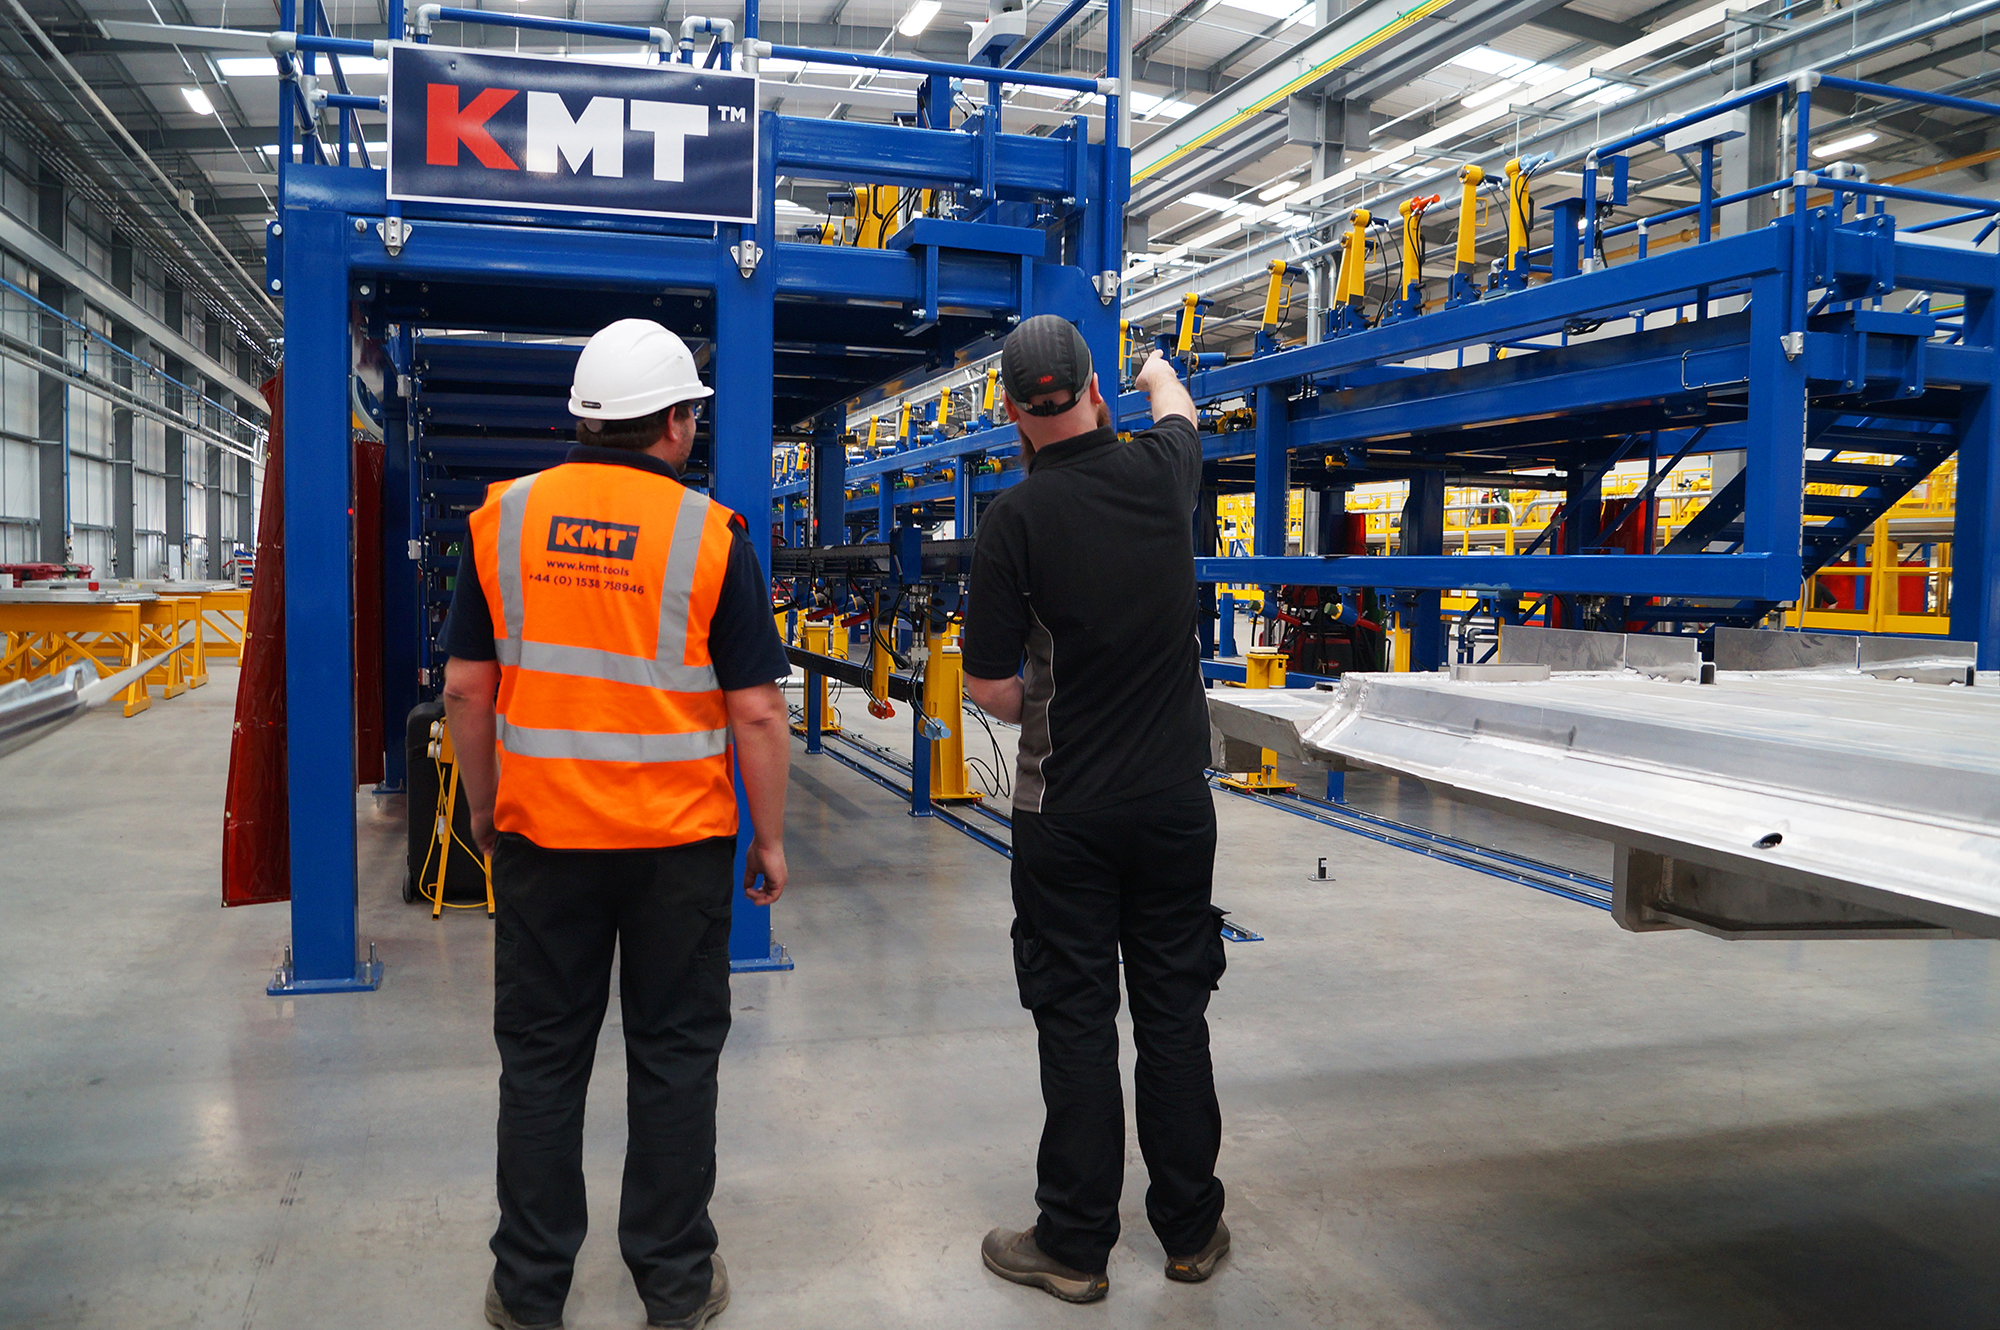 KMT provides on-site machine installation and maintenance.